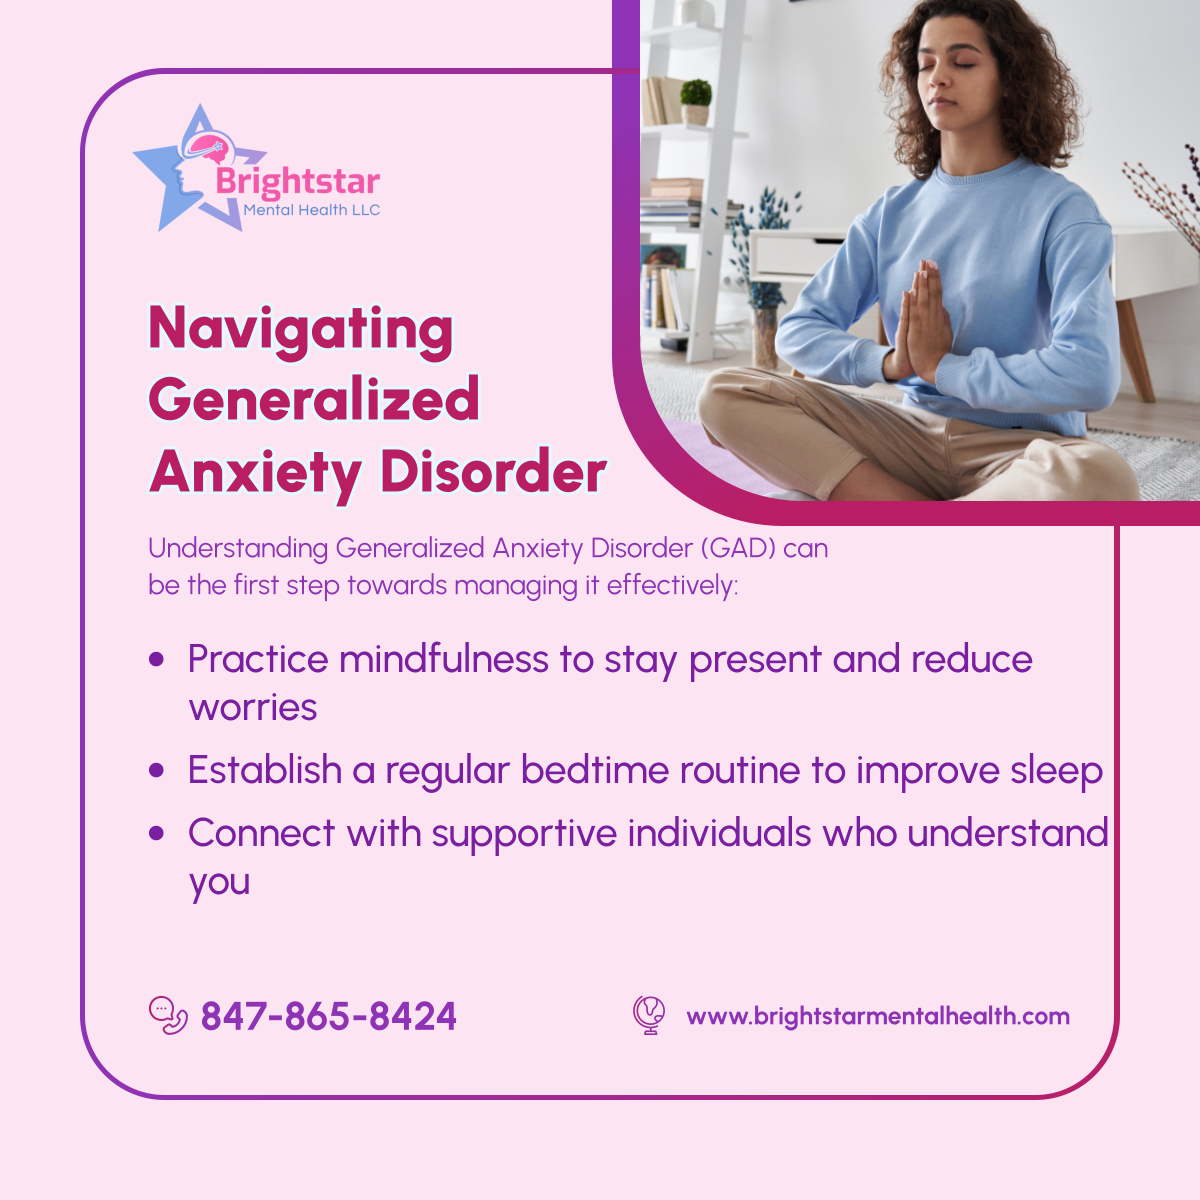 Managing Generalized Anxiety Disorder begins with simple, daily practices. Incorporate mindfulness, a soothing bedtime routine, and support...  

Read more: instagram.com/p/C6tcbM3J2mu/

#ChicagoTherapy #IllinoisTherapist #BehavioralHealthCare #MentalHealth #BrightstarMentalHealth